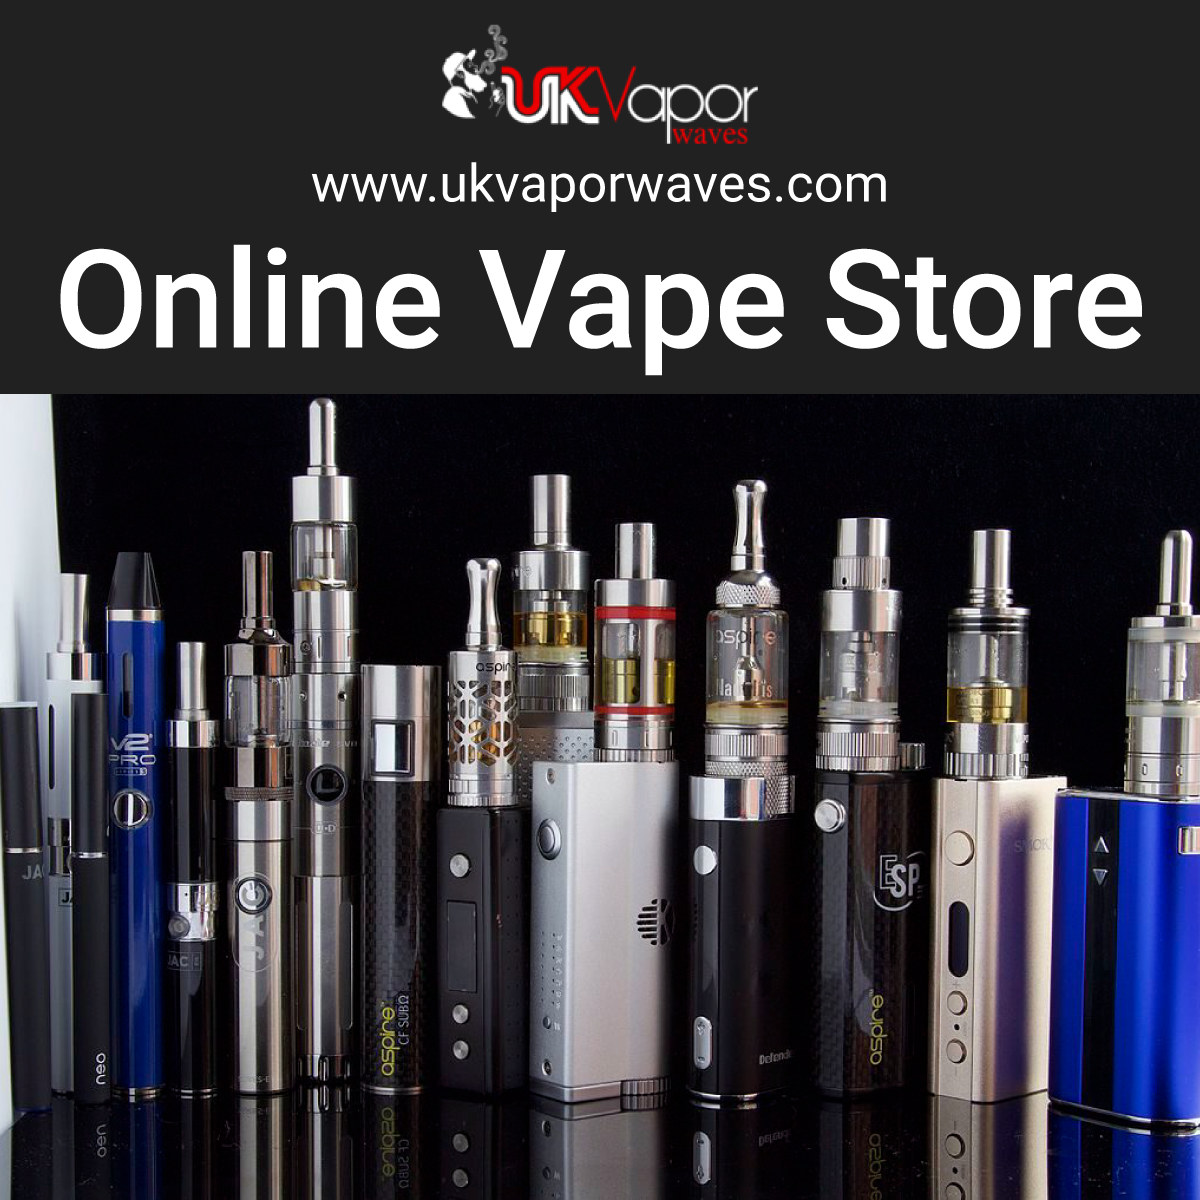 Tips To Select The Best Online Vape Store For Your E-Cigarette Needs